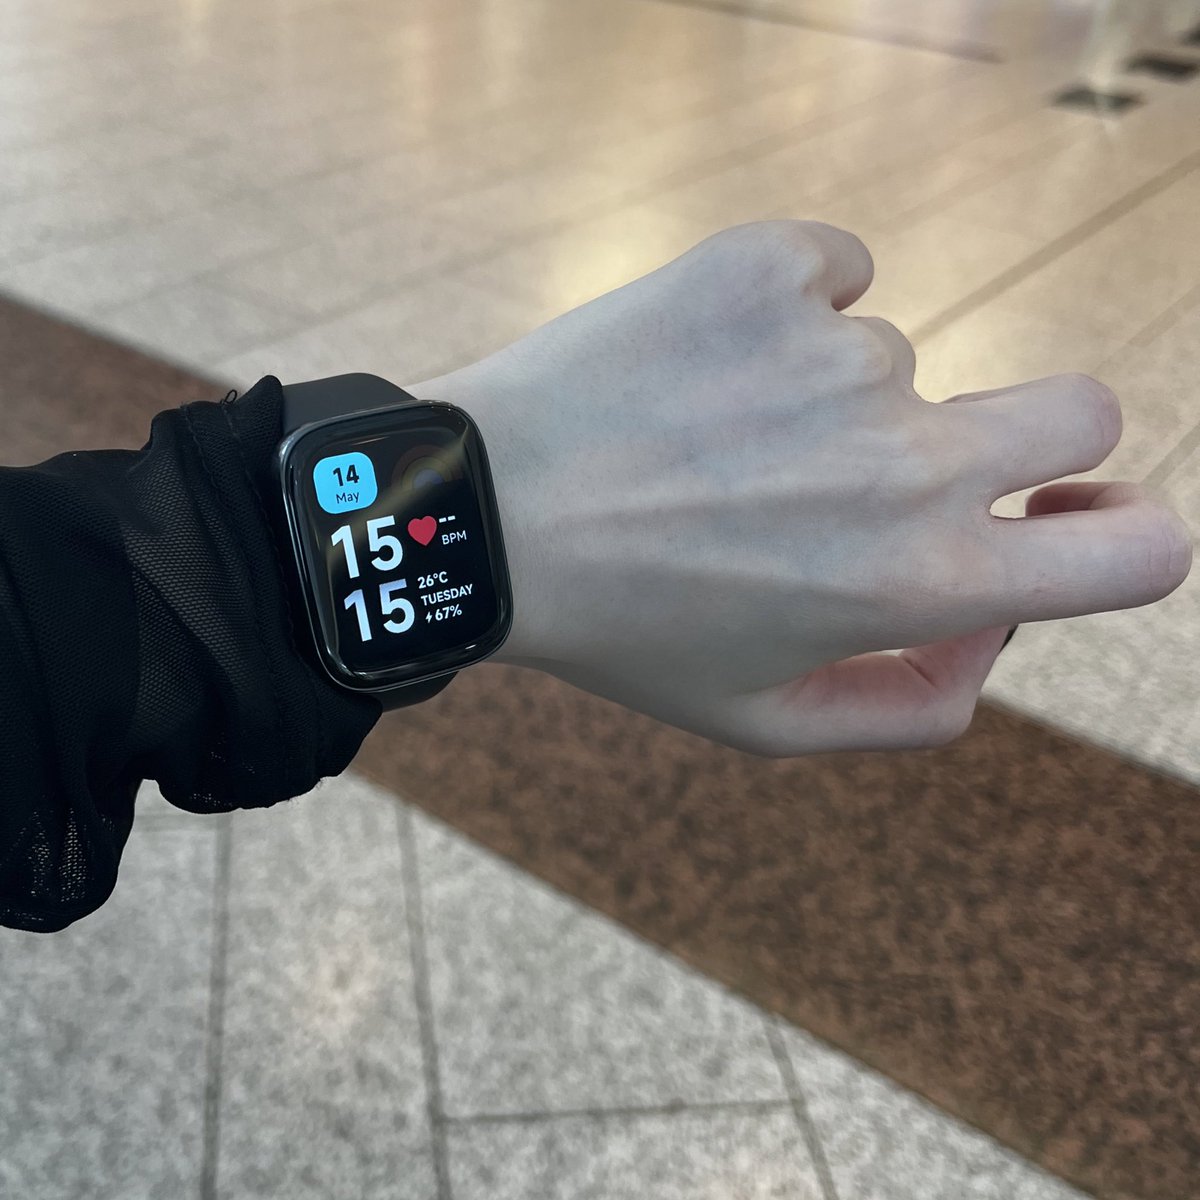 finally bought a smart watch!! got a xiaomi one for 40€ for now to see if I am comfortable with wearing a watch before spending tons on an Apple Watch and not liking it